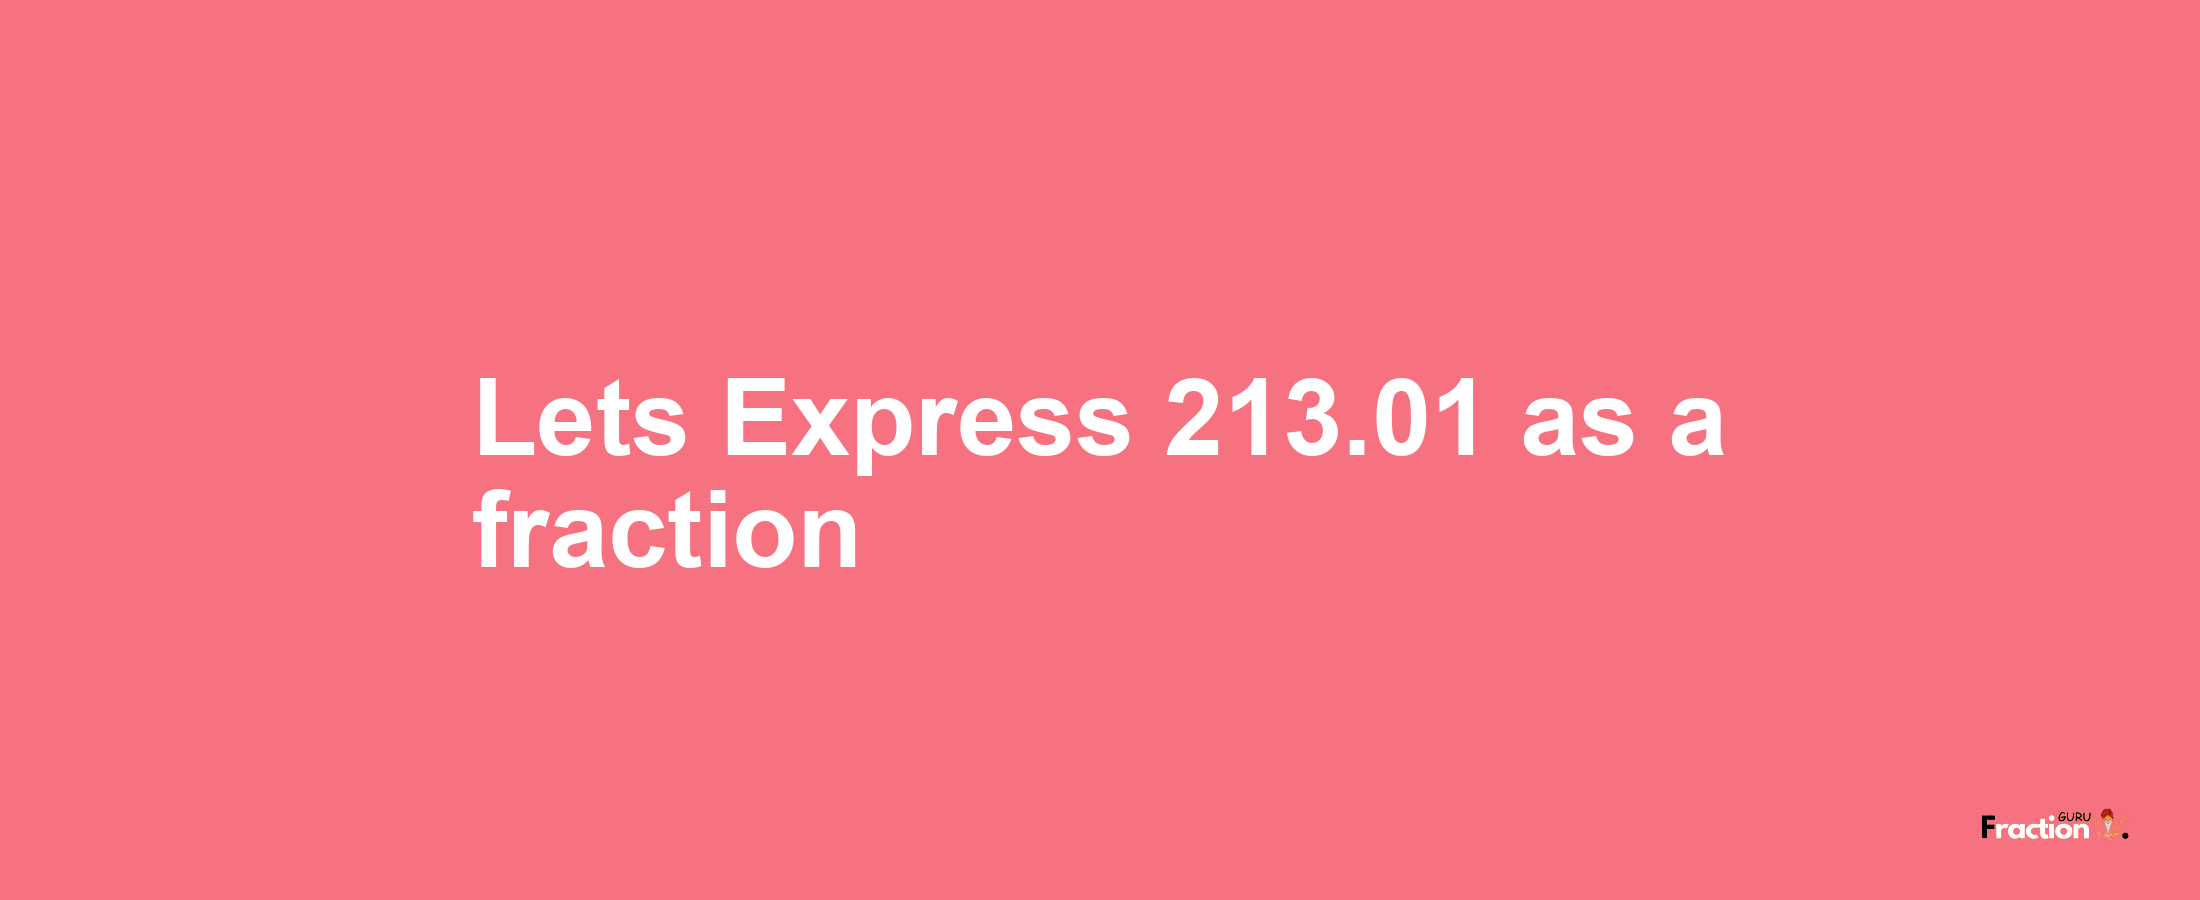 Lets Express 213.01 as afraction